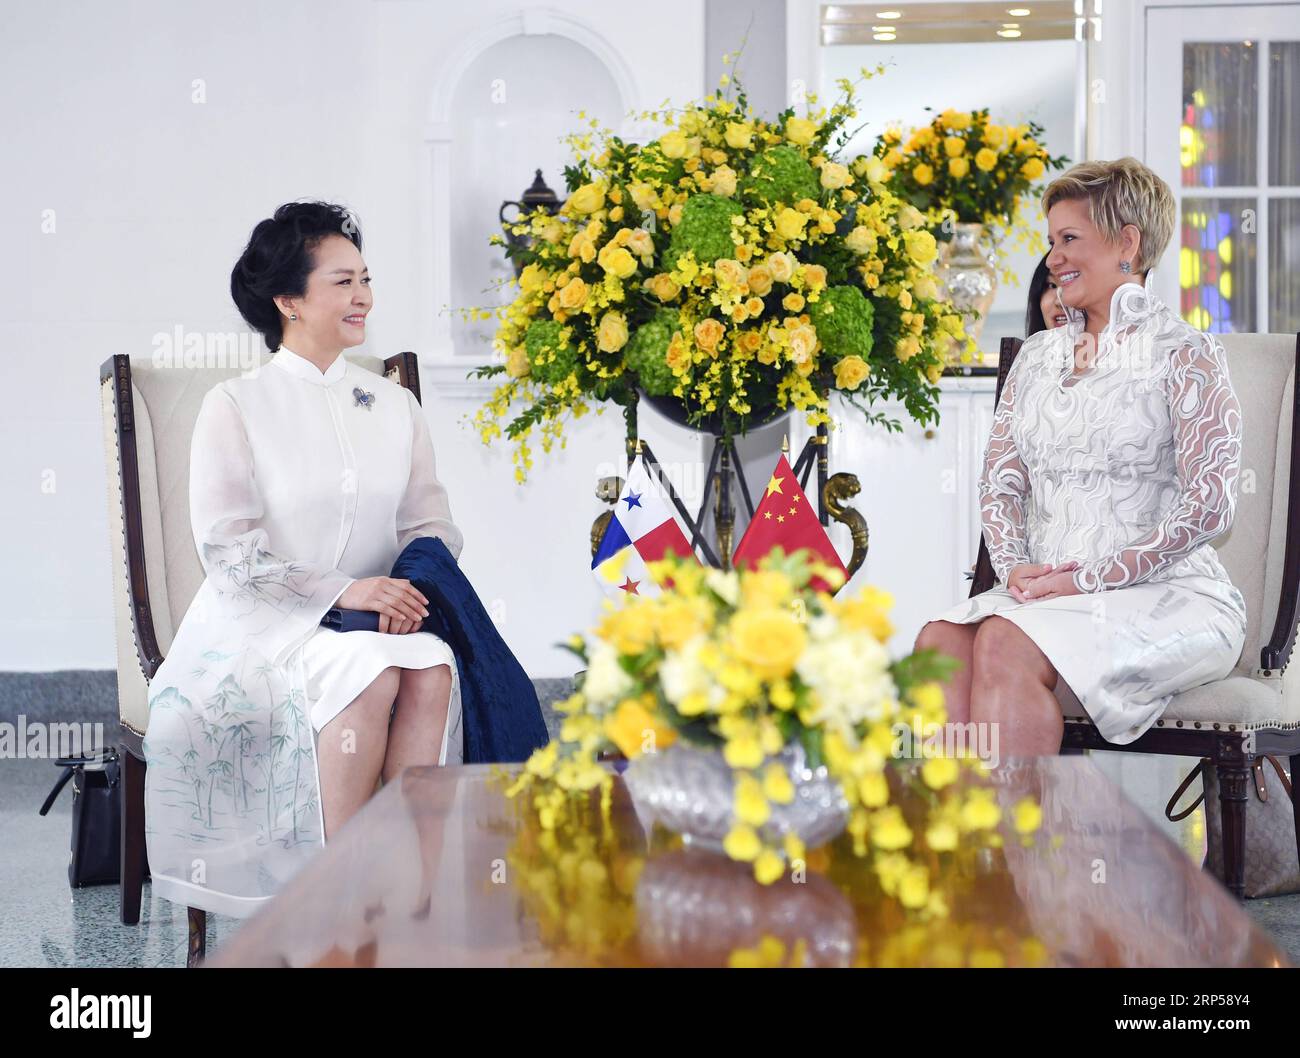 (181203) -- PANAMA CITY, Dec. 3, 2018 -- Peng Liyuan (L), wife of Chinese President Xi Jinping, and World Health Organization goodwill ambassador for tuberculosis and HIV/AIDS and UNESCO special envoy for the advancement of girls and women s education, meets with Panamanian First Lady Lorena Castillo Garcia, a special ambassador for UNAIDS in Latin America, in Panama City, Panama, Dec. 3, 2018. Peng and Castillo jointly attended a publicizing activity on AIDS prevention and treatment on Monday. ) (zwx) PANAMA-CHINA-PRESIDENTS WIVES-AIDS PREVENTION YanxYan PUBLICATIONxNOTxINxCHN Stock Photo